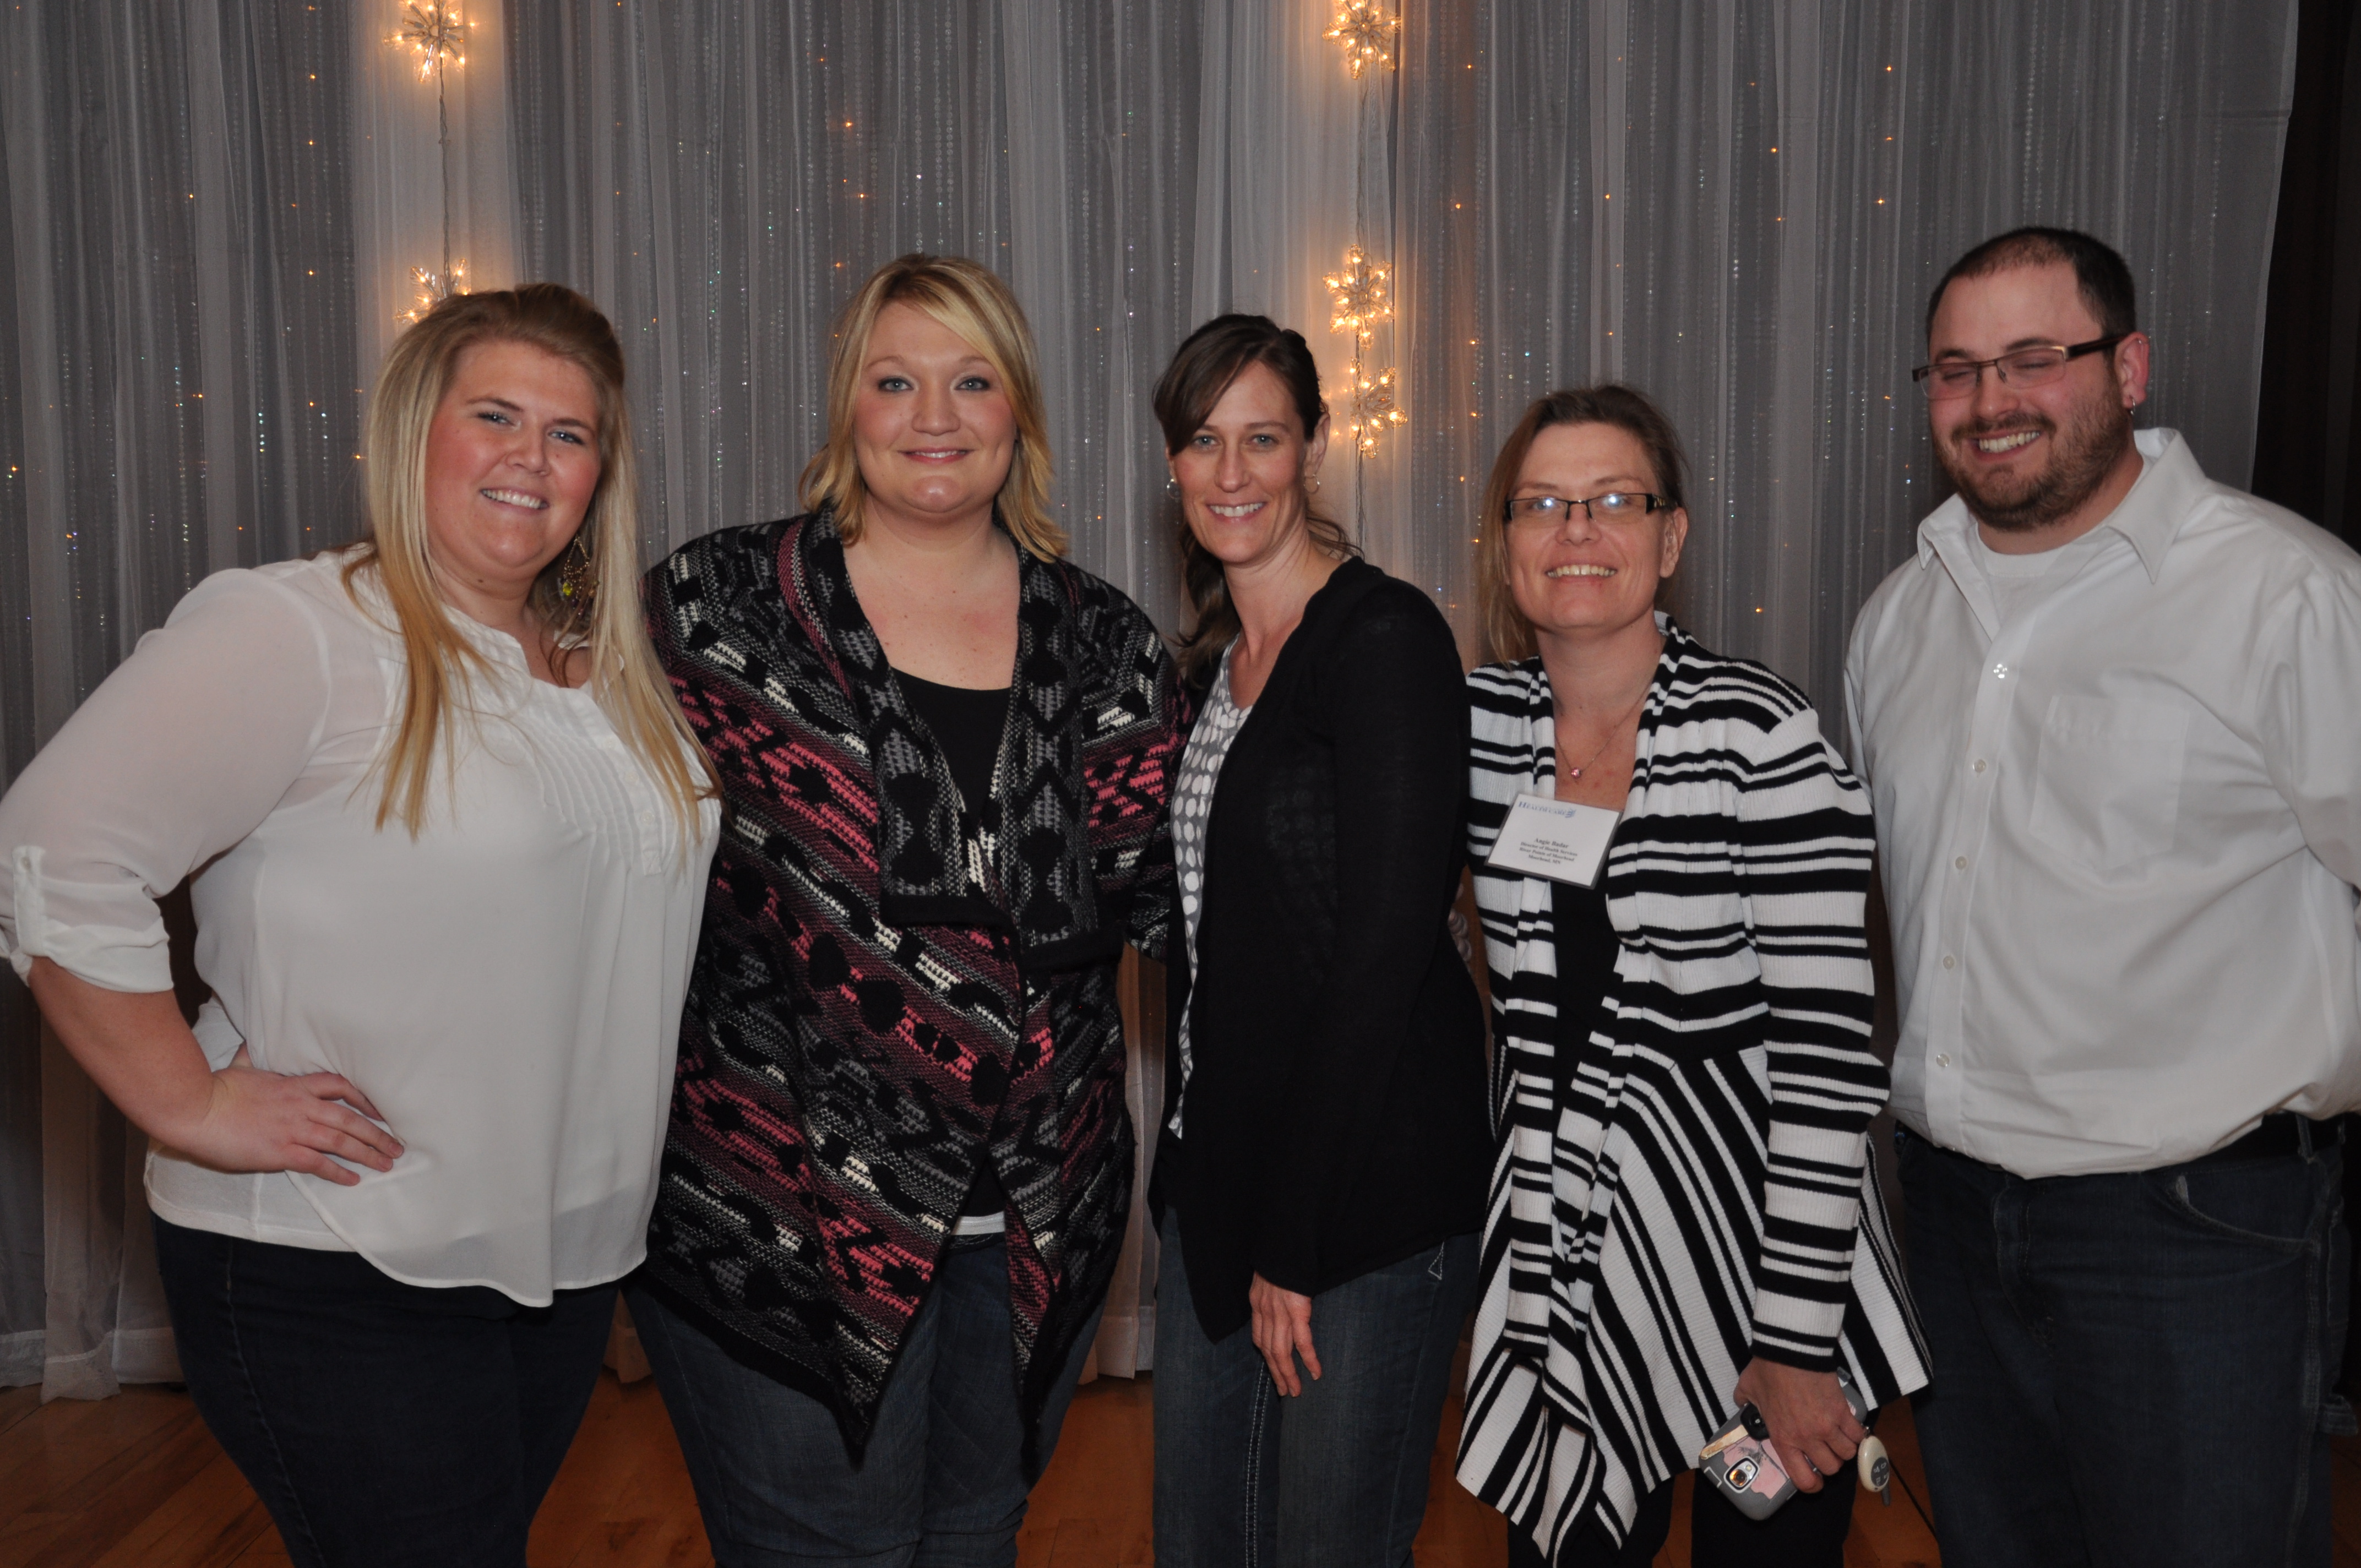 The team from RiverPointe Senior Living pose for a photo at the awards banquet.